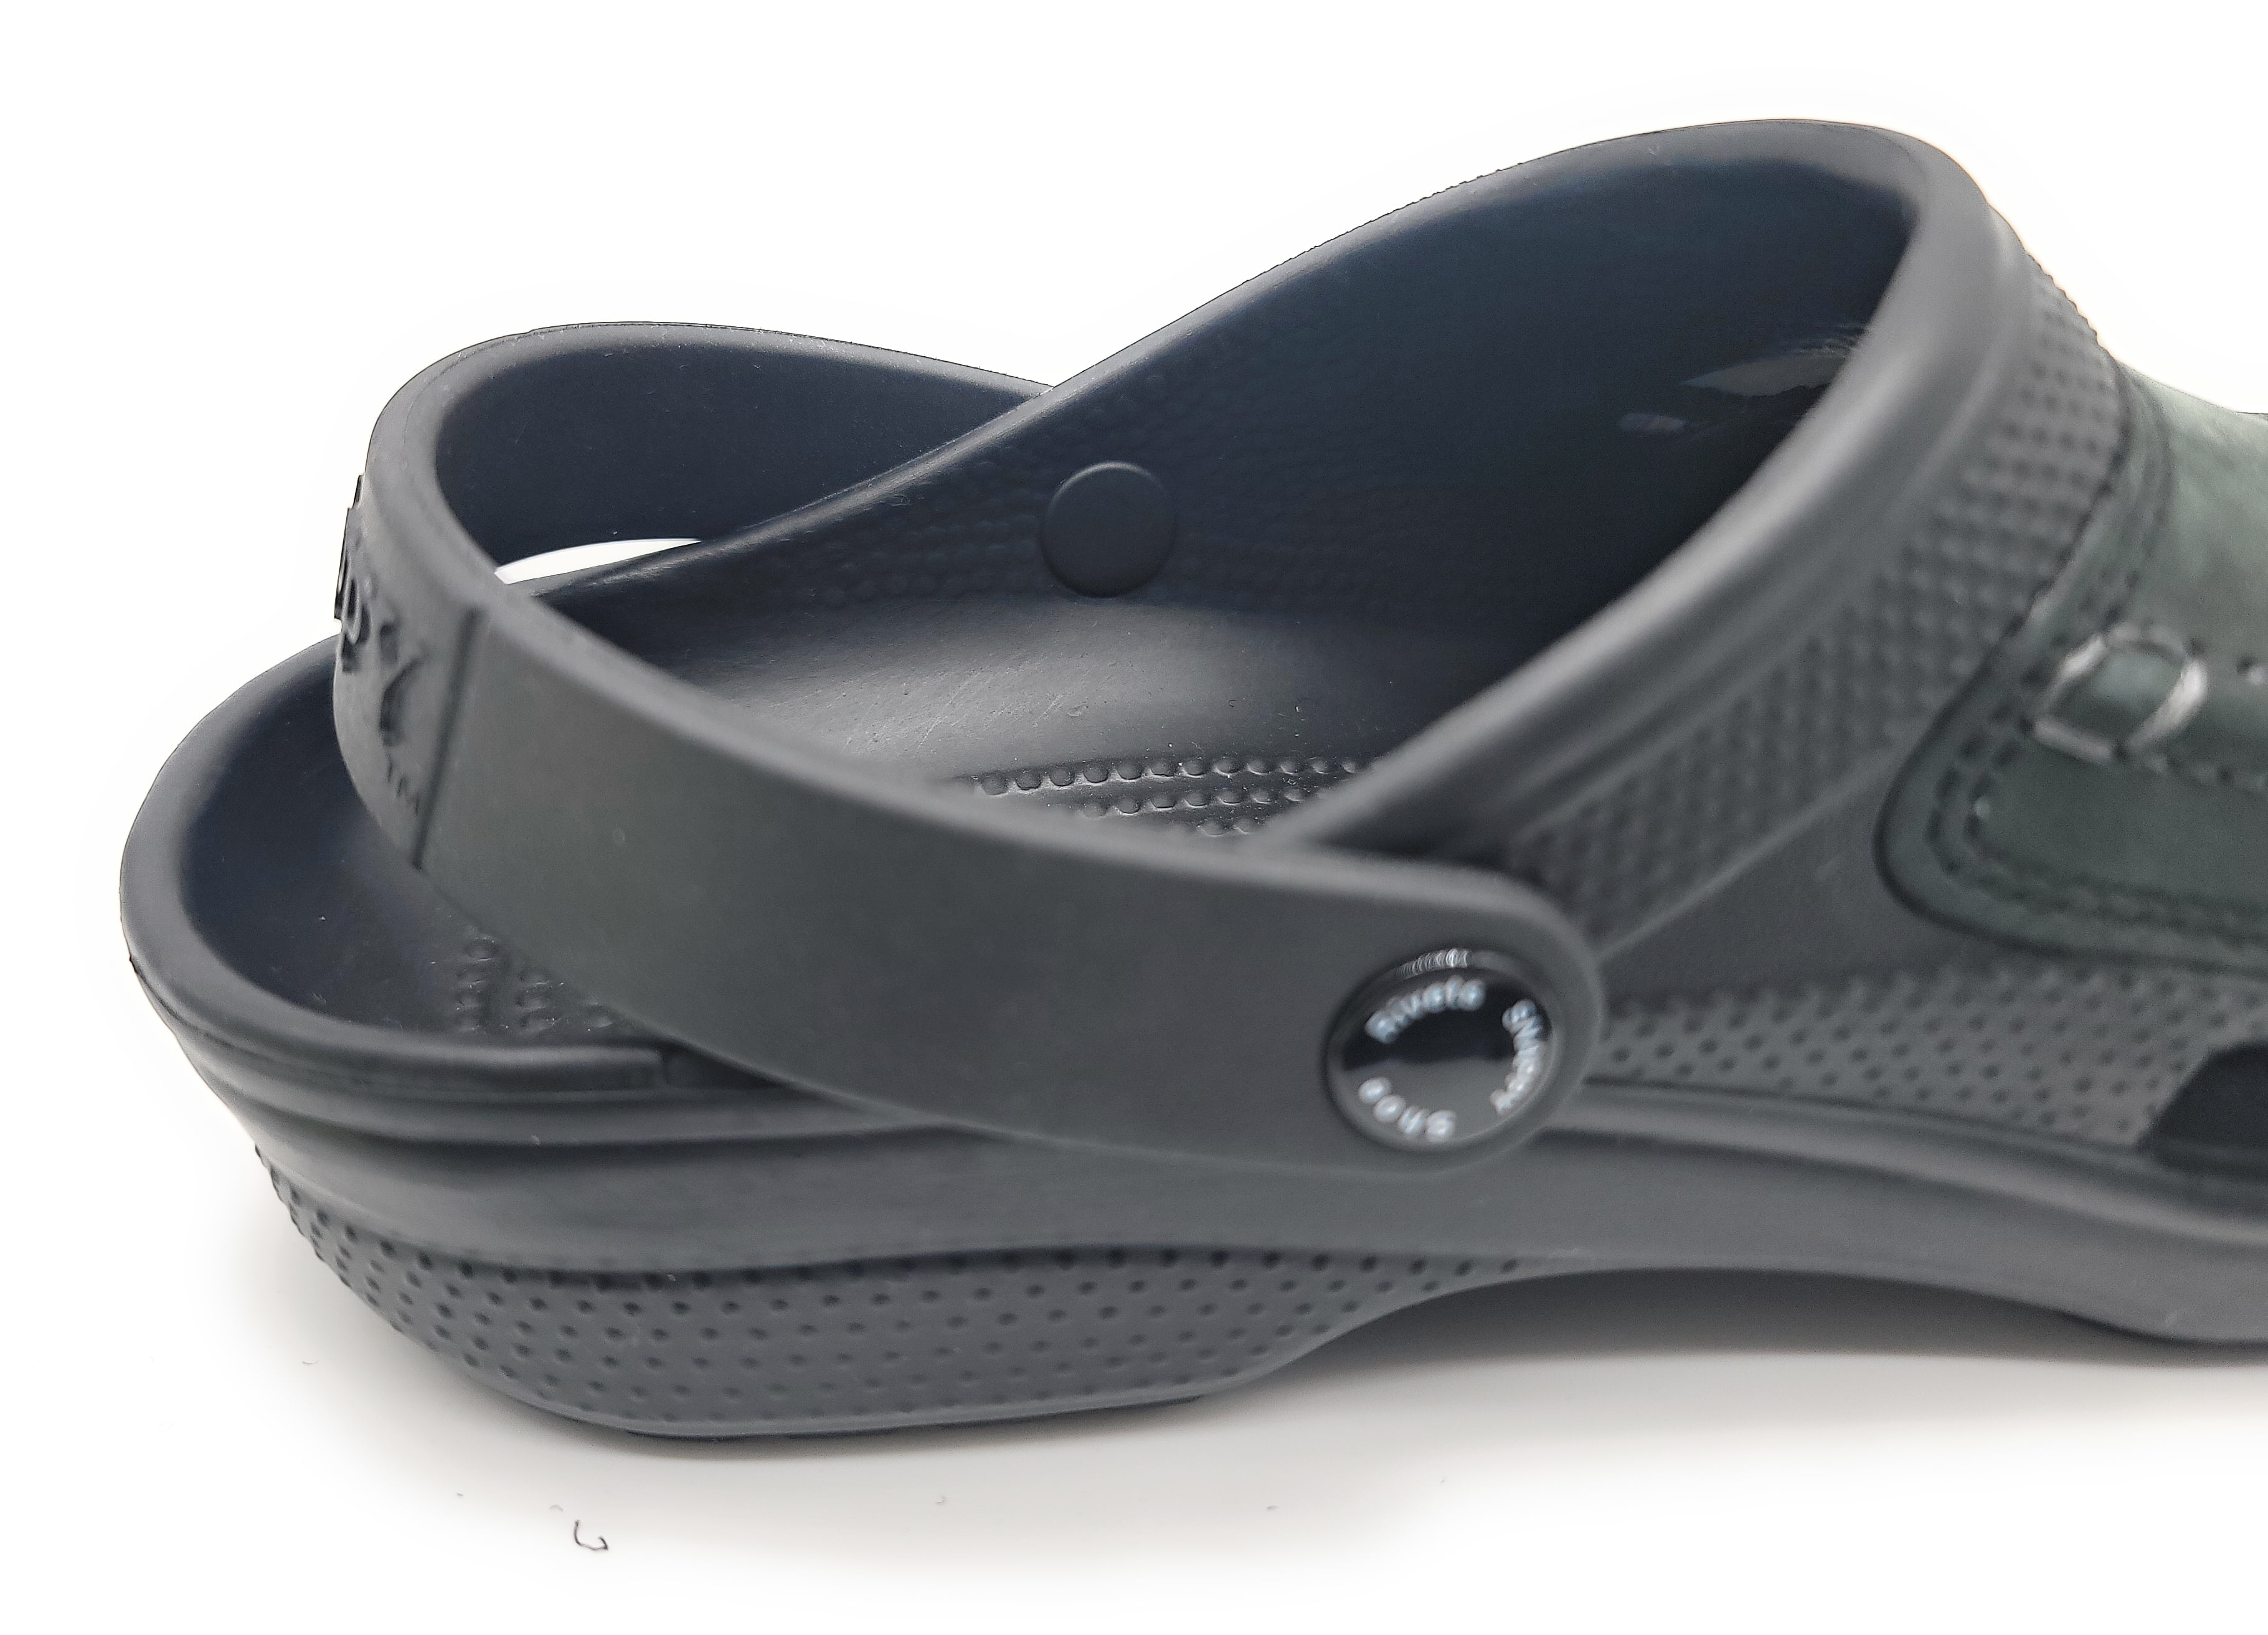 strap Replacement Heel That fit Croc Grey